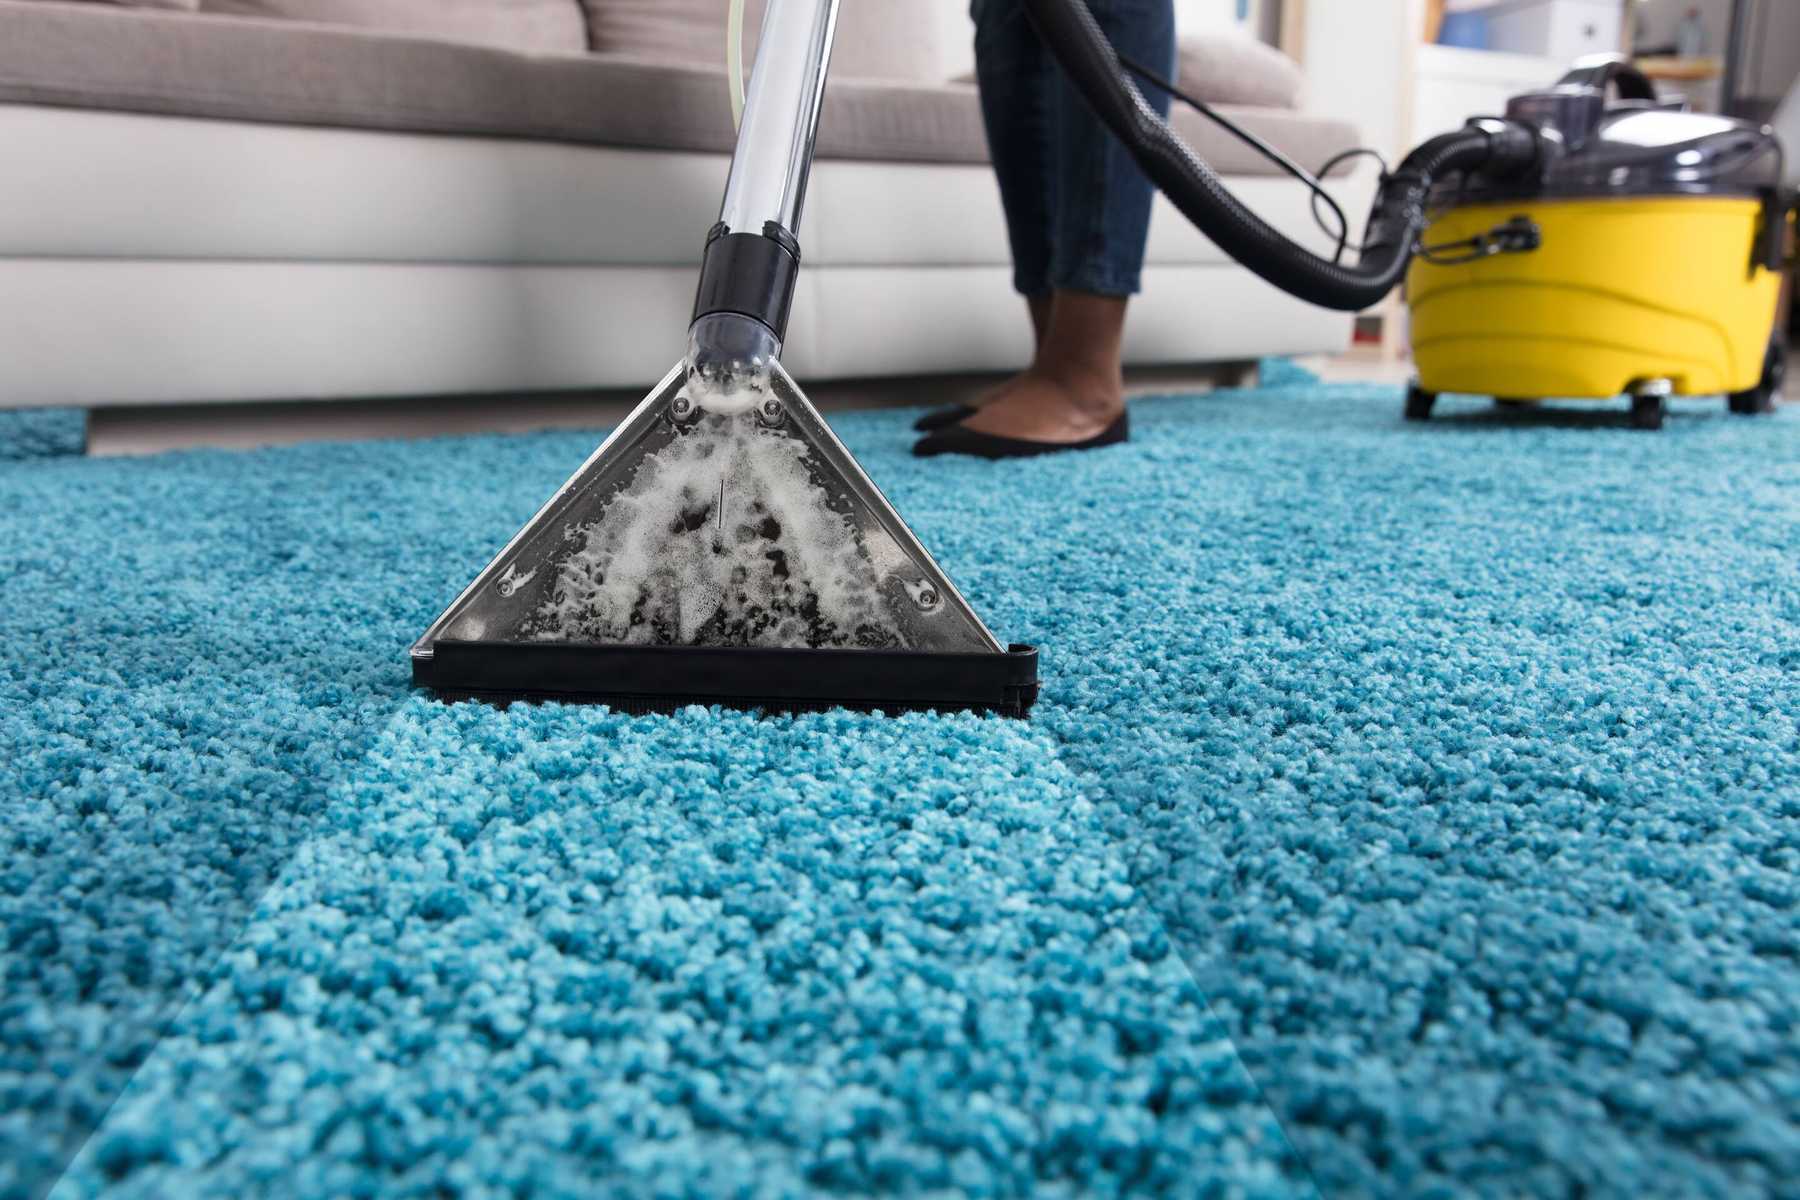 Tips on how to clean carpets